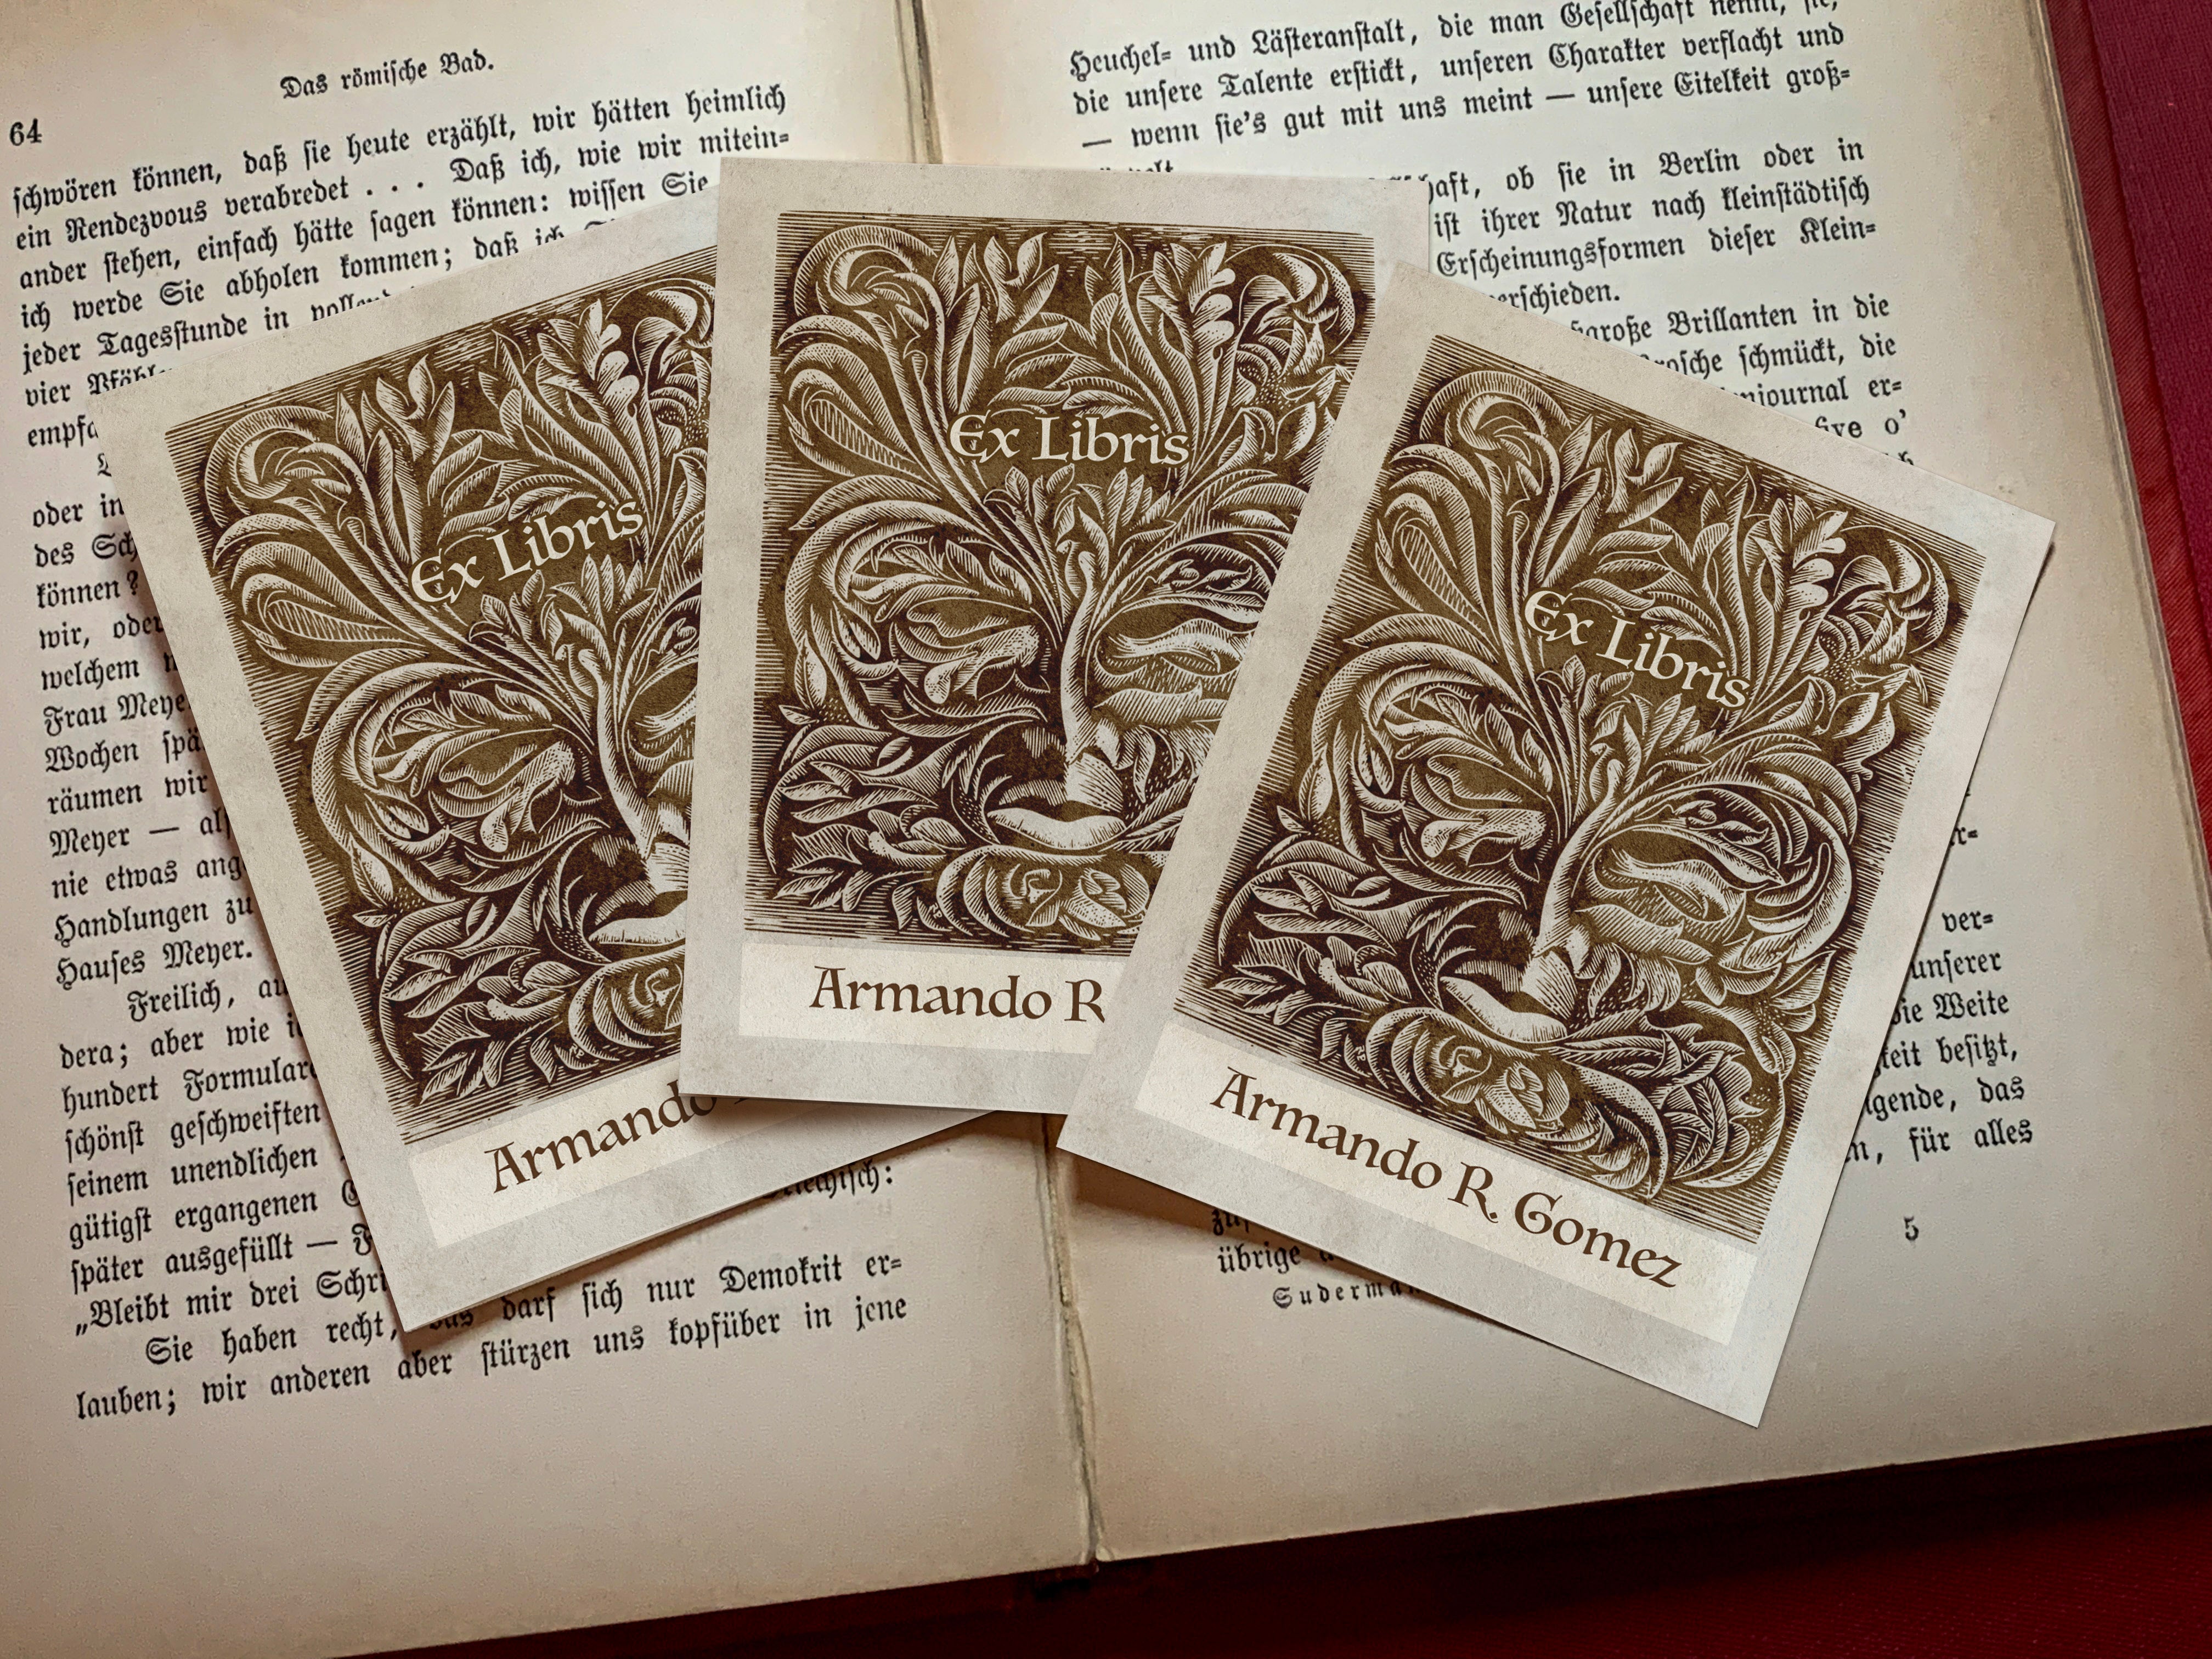 Green Man, Personalized Ex-Libris Bookplates, Crafted on Traditional Gummed Paper, 3in x 4in, Set of 30